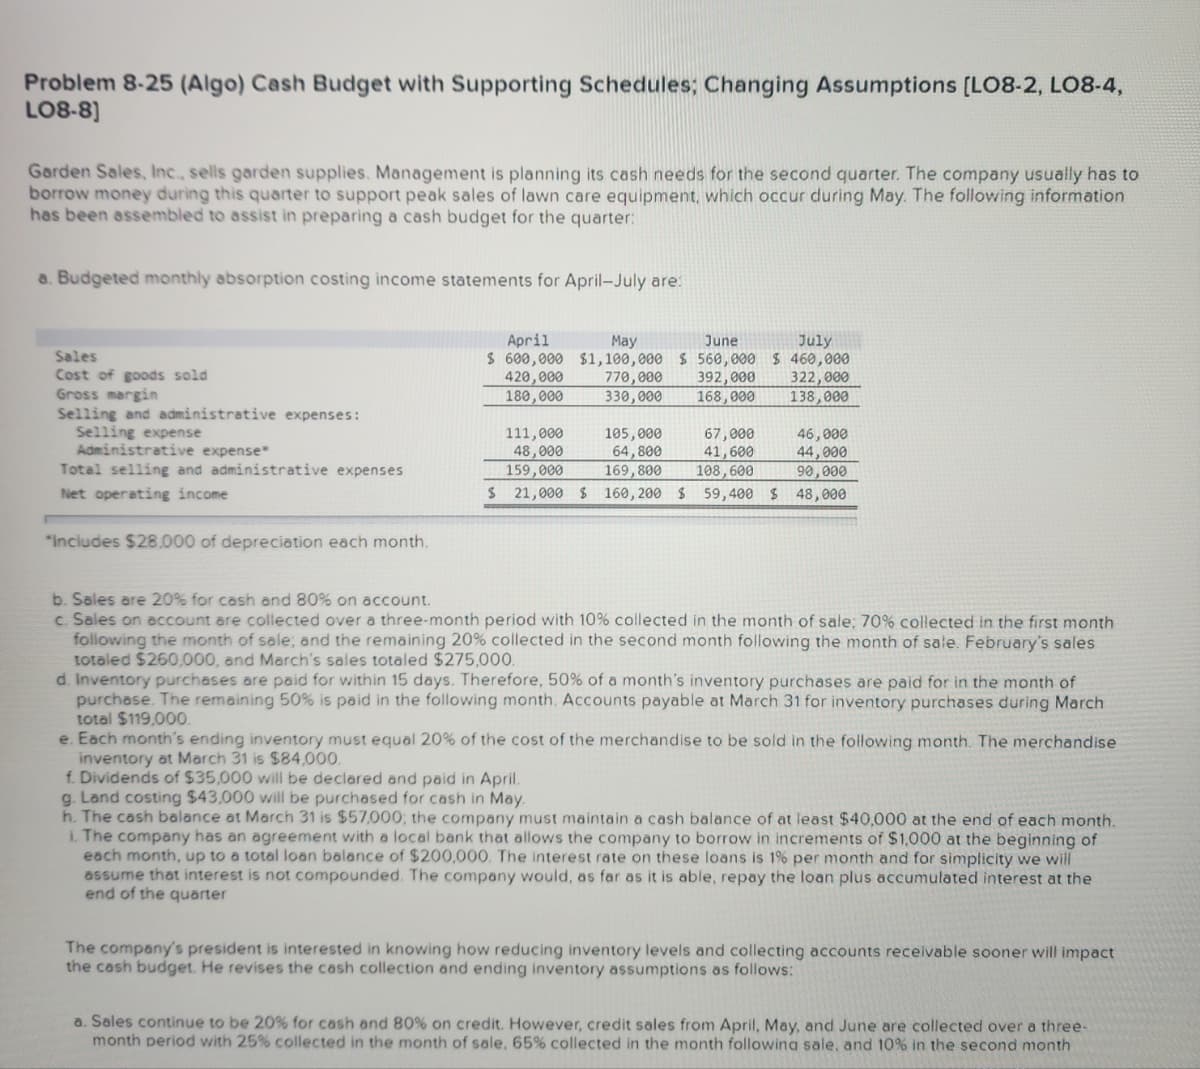 Problem 8-25 (Algo) Cash Budget with Supporting Schedules; Changing Assumptions [LO8-2, L08-4,
LO8-8]
Garden Sales, Inc., sells garden supplies. Management is planning its cash needs for the second quarter. The company usually has to
borrow money during this quarter to support peak sales of lawn care equipment, which occur during May. The following information
has been assembled to assist in preparing a cash budget for the quarter:
a. Budgeted monthly absorption costing income statements for April-July are:
Sales
Cost of goods sold
Gross margin
Selling and administrative expenses:
Selling expense
Administrative expense*
Total selling and administrative expenses
Net operating income
"Includes $28.000 of depreciation each month.
April
May
June
$ 600,000 $1,100,000 $ 560,000
420,000
770,000 392,000
180,000
330,000 168,000
July
$ 460,000
322,000
138,000
111,000
48,000
159,000
105,000
67,000
46,000
64,800
41,600
44,000
169,800 108,600
90,000
$ 21,000 $ 160,200 $ 59,400 $ 48,000
b. Sales are 20% for cash and 80% on account.
c. Sales on account are collected over a three-month period with 10% collected in the month of sale; 70% collected in the first month
following the month of sale; and the remaining 20% collected in the second month following the month of sale. February's sales
totaled $260,000, and March's sales totaled $275,000.
d. Inventory purchases are paid for within 15 days. Therefore, 50% of a month's inventory purchases are paid for in the month of
purchase. The remaining 50% is paid in the following month. Accounts payable at March 31 for inventory purchases during March
total $119,000.
e. Each month's ending inventory must equal 20% of the cost of the merchandise to be sold in the following month. The merchandise
inventory at March 31 is $84,000.
f. Dividends of $35,000 will be declared and paid in April.
g. Land costing $43,000 will be purchased for cash in May.
h. The cash balance at March 31 is $57,000; the company must maintain a cash balance of at least $40,000 at the end of each month.
i. The company has an agreement with a local bank that allows the company to borrow in increments of $1,000 at the beginning of
each month, up to a total loan balance of $200,000. The interest rate on these loans is 1% per month and for simplicity we will
assume that interest is not compounded. The company would, as far as it is able, repay the loan plus accumulated interest at the
end of the quarter
The company's president is interested in knowing how reducing inventory levels and collecting accounts receivable sooner will impact
the cash budget. He revises the cash collection and ending inventory assumptions as follows:
a. Sales continue to be 20% for cash and 80% on credit. However, credit sales from April, May, and June are collected over a three-
month period with 25% collected in the month of sale, 65% collected in the month following sale, and 10% in the second month